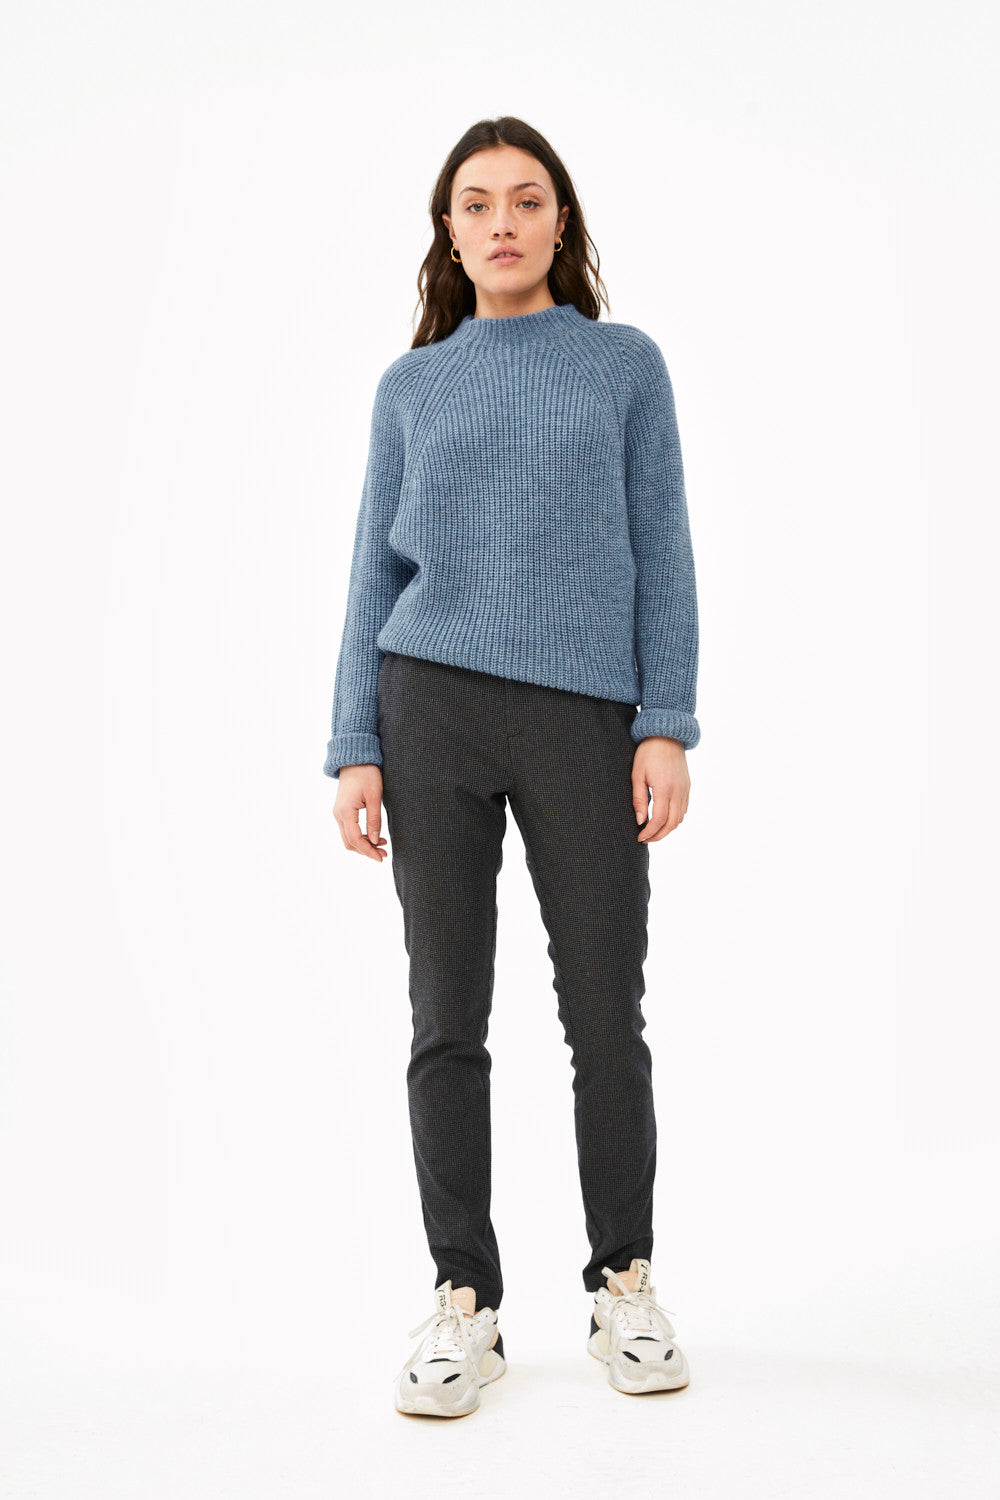 By-Bar - nina susi steel blue pullover